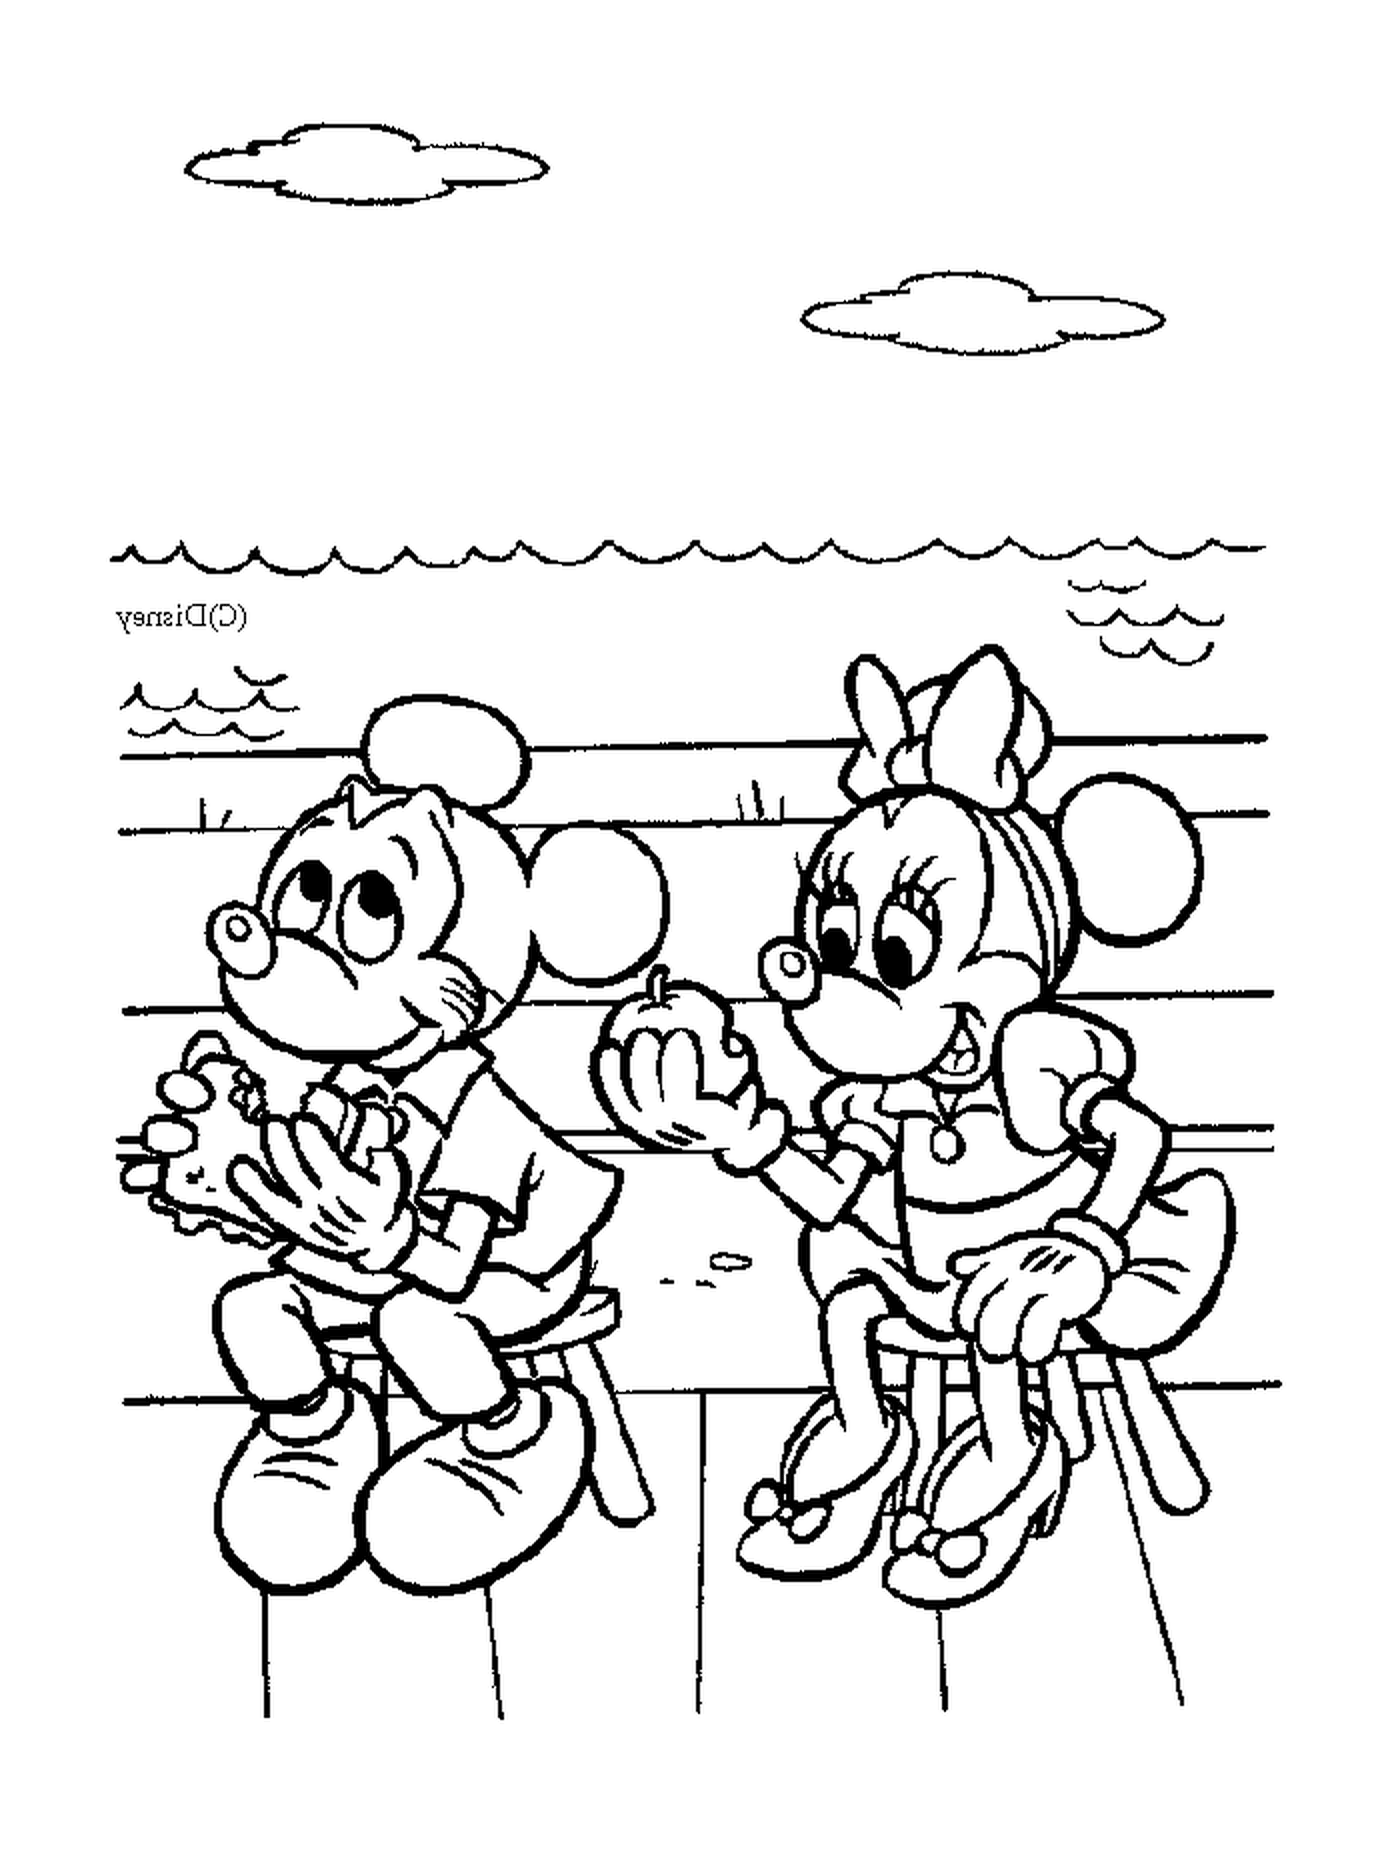  Mickey and Minnie eat: sitting on a bench 